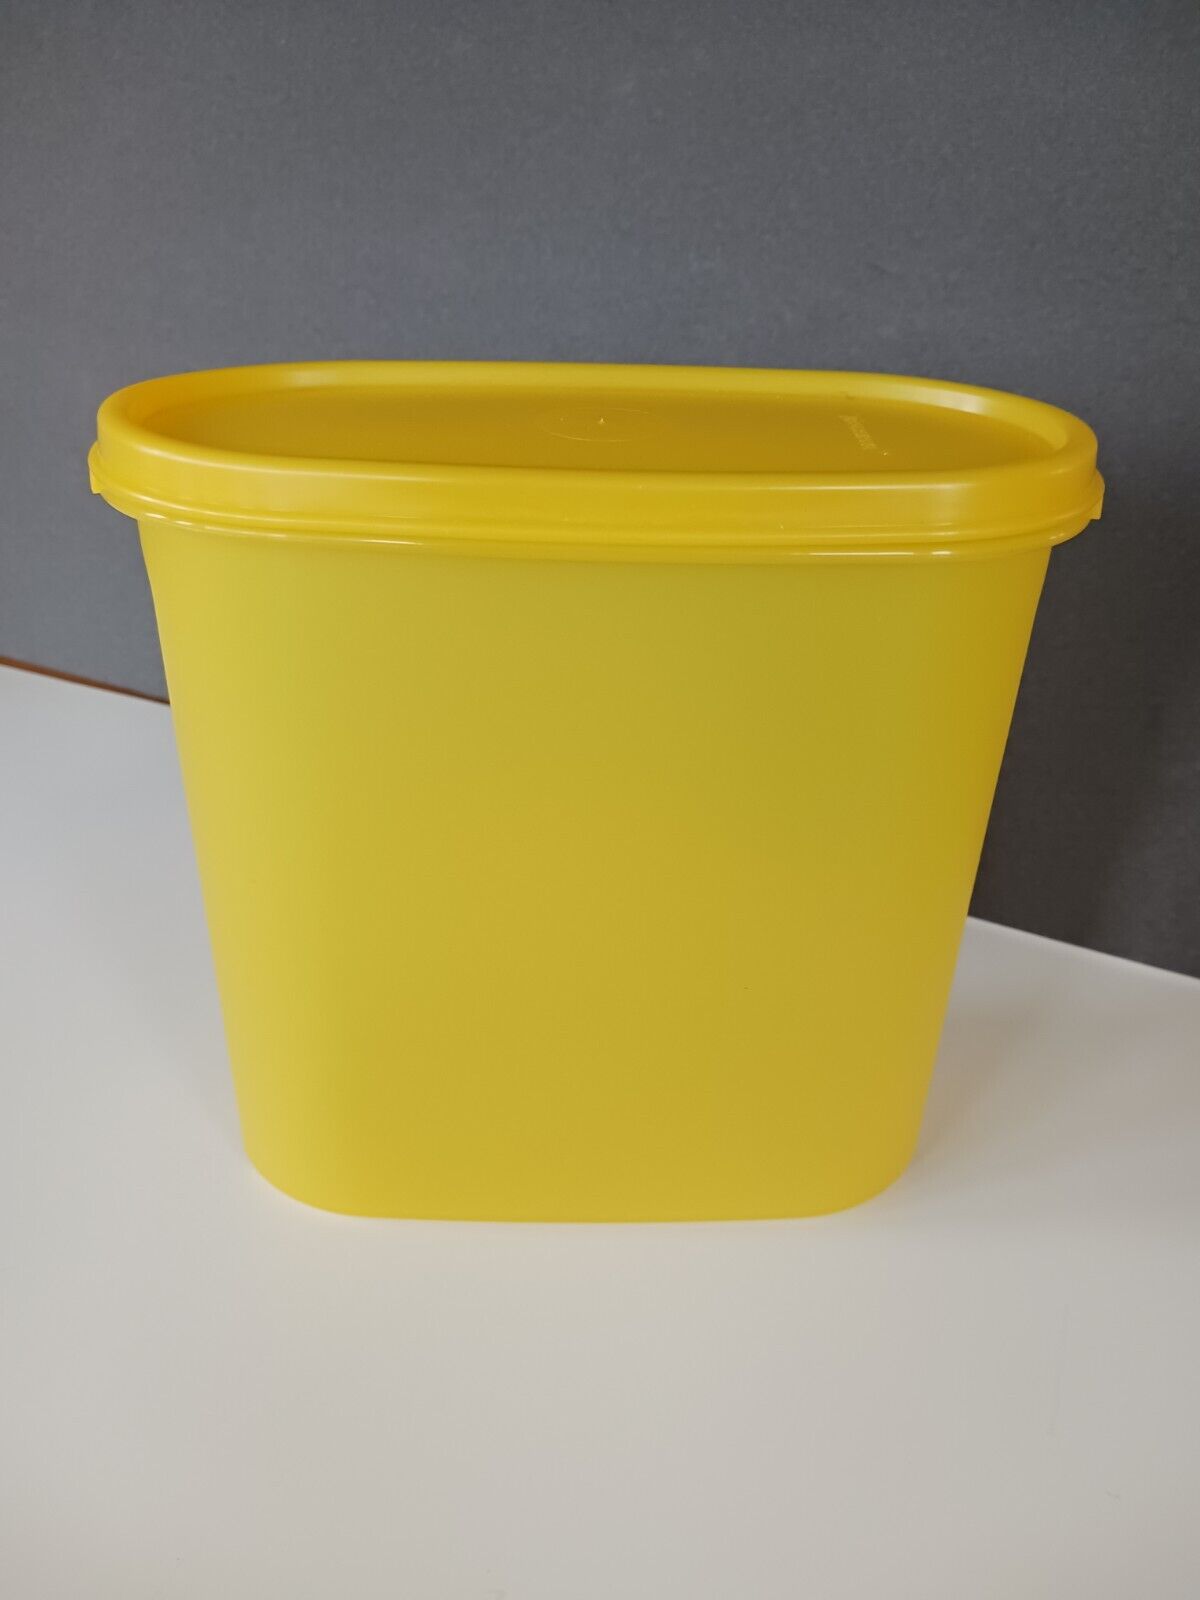 New Tupperware 1613 Modular Mate Storage Container 7.25 Cups With Lid Yellow